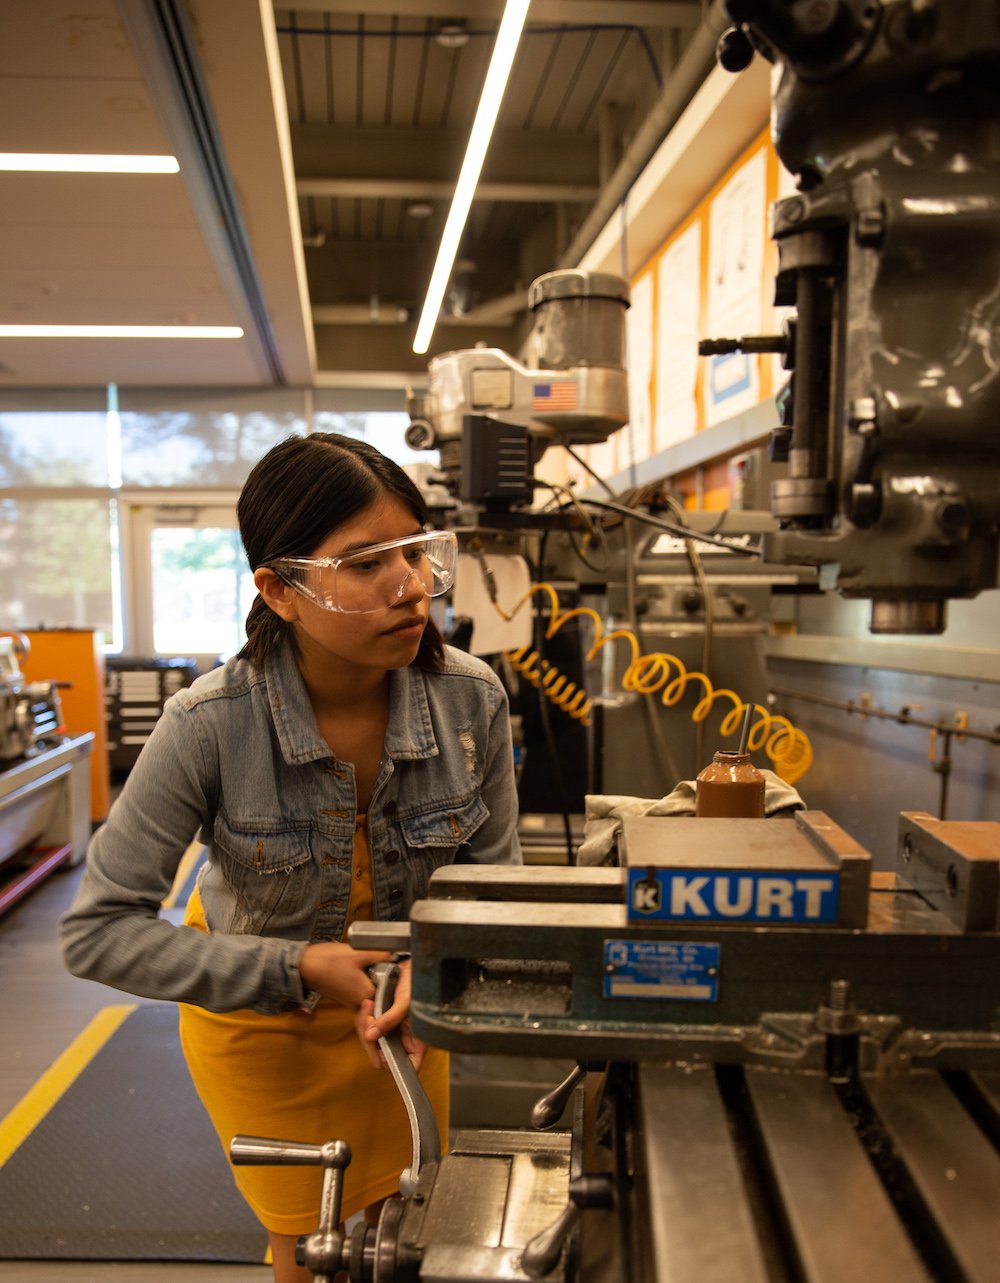 Giselle working in a mechanical engineering lab